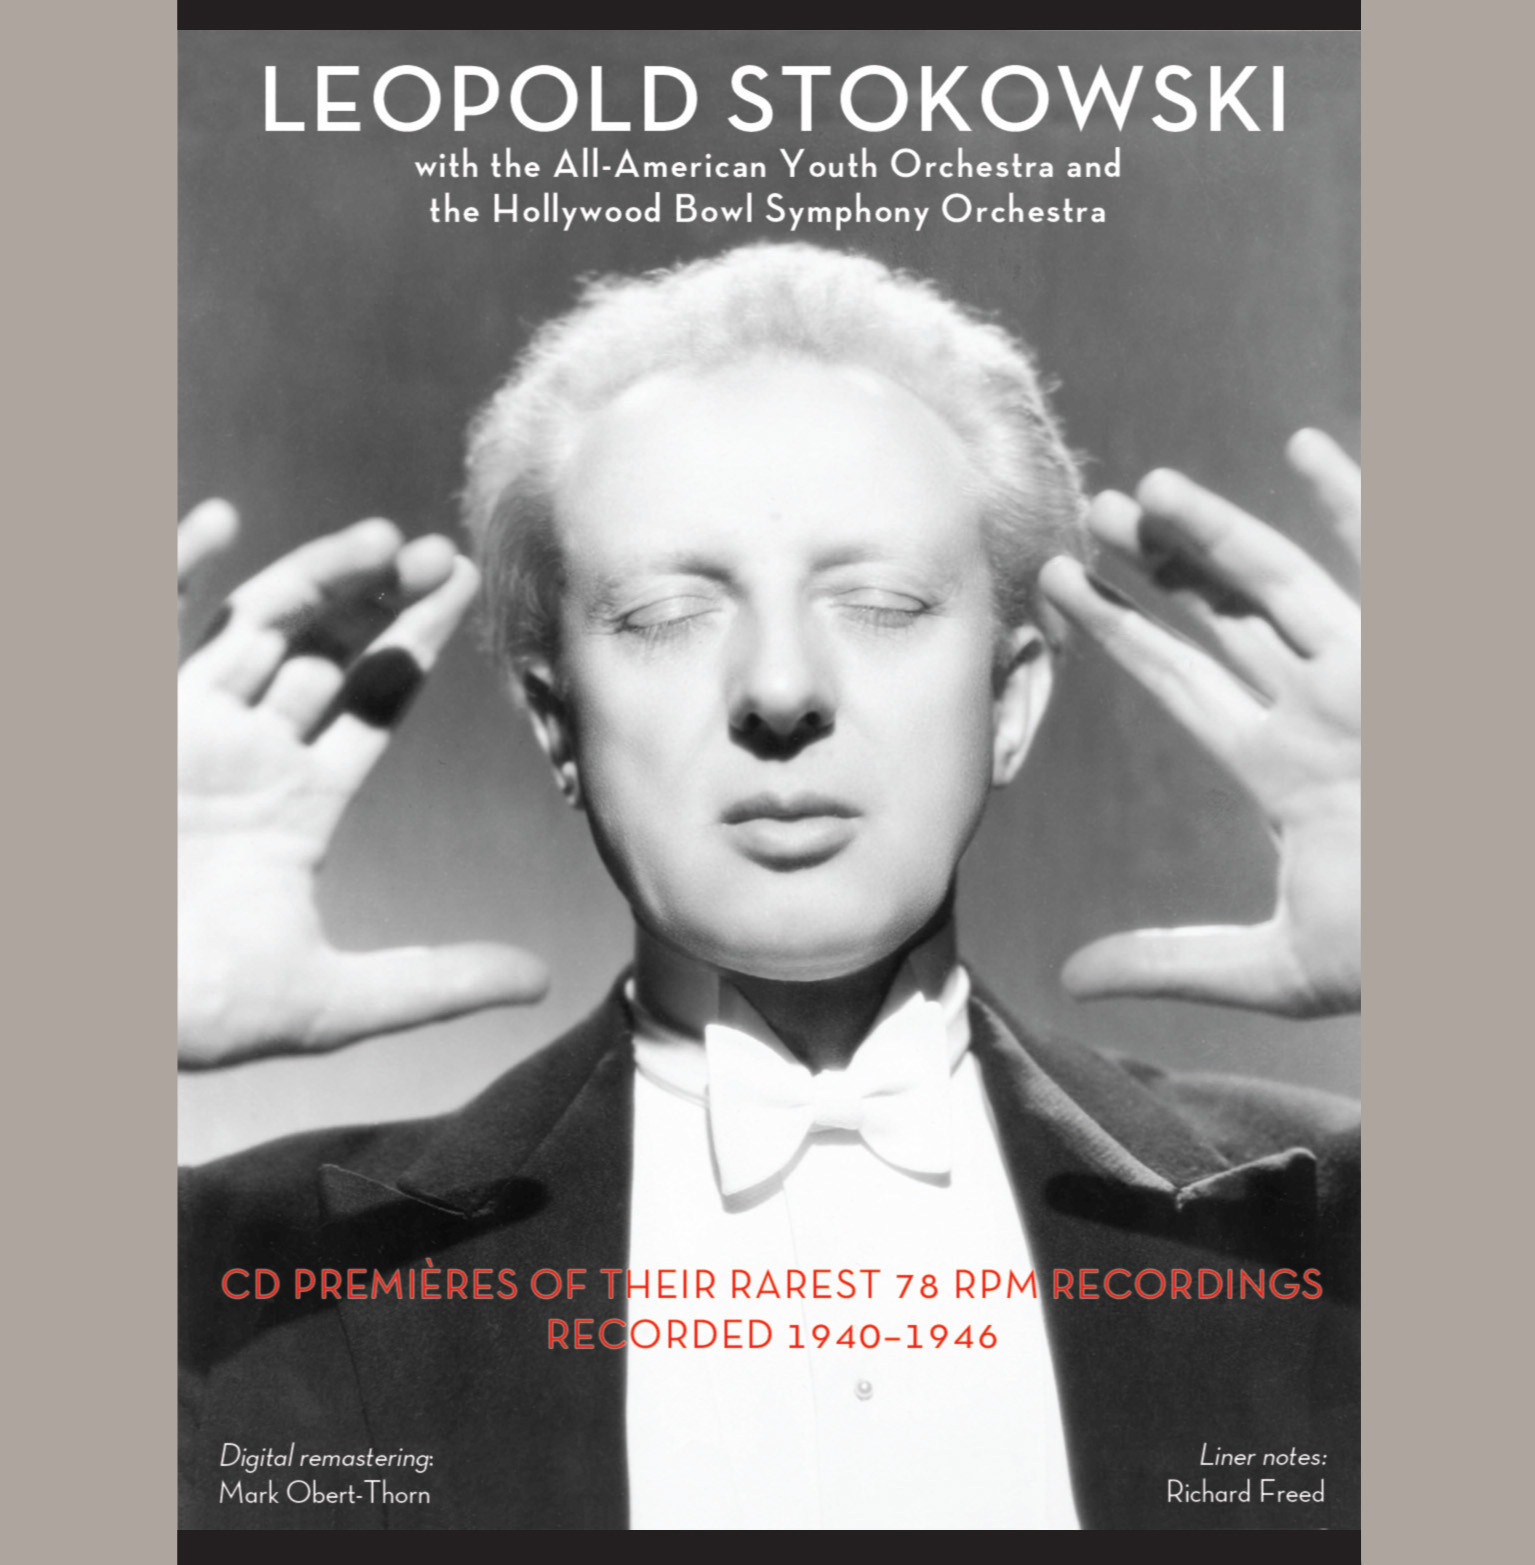 From the Archives - Early recordings from Leopold Stokowski